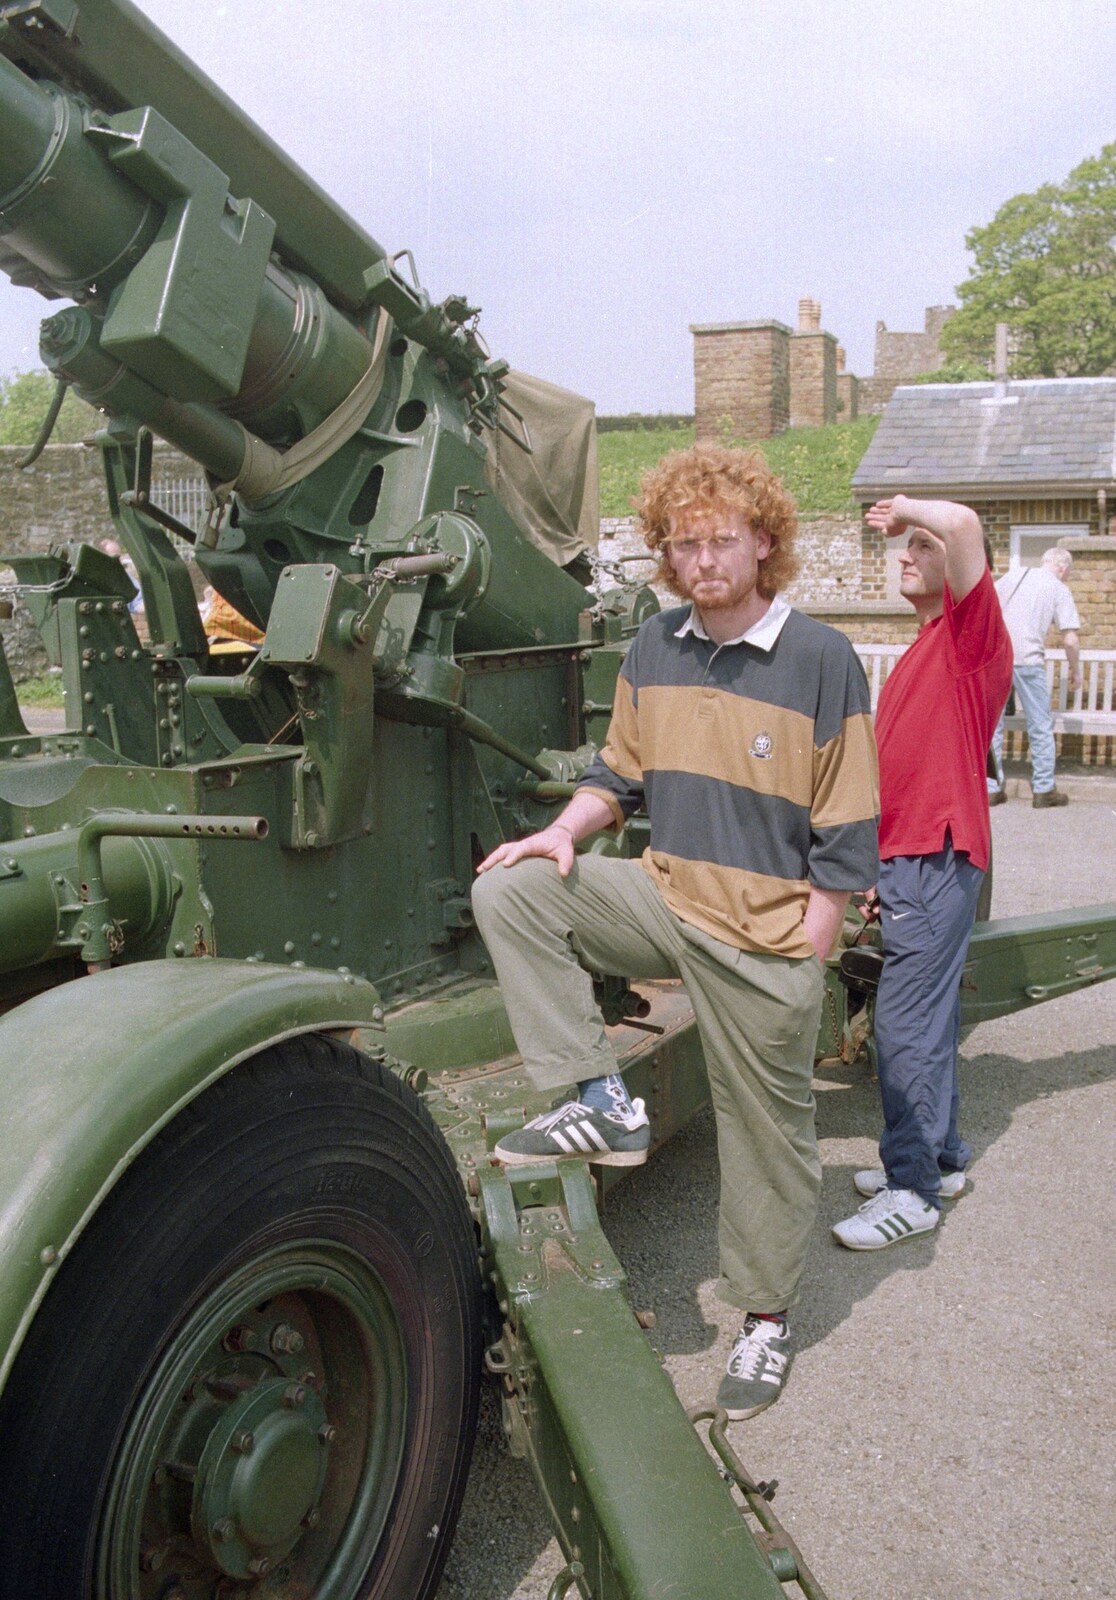 Wavy stands on some sort of artillery piece from A BSCC Bike Ride to Gravelines, Pas de Calais, France - 11th May 2000